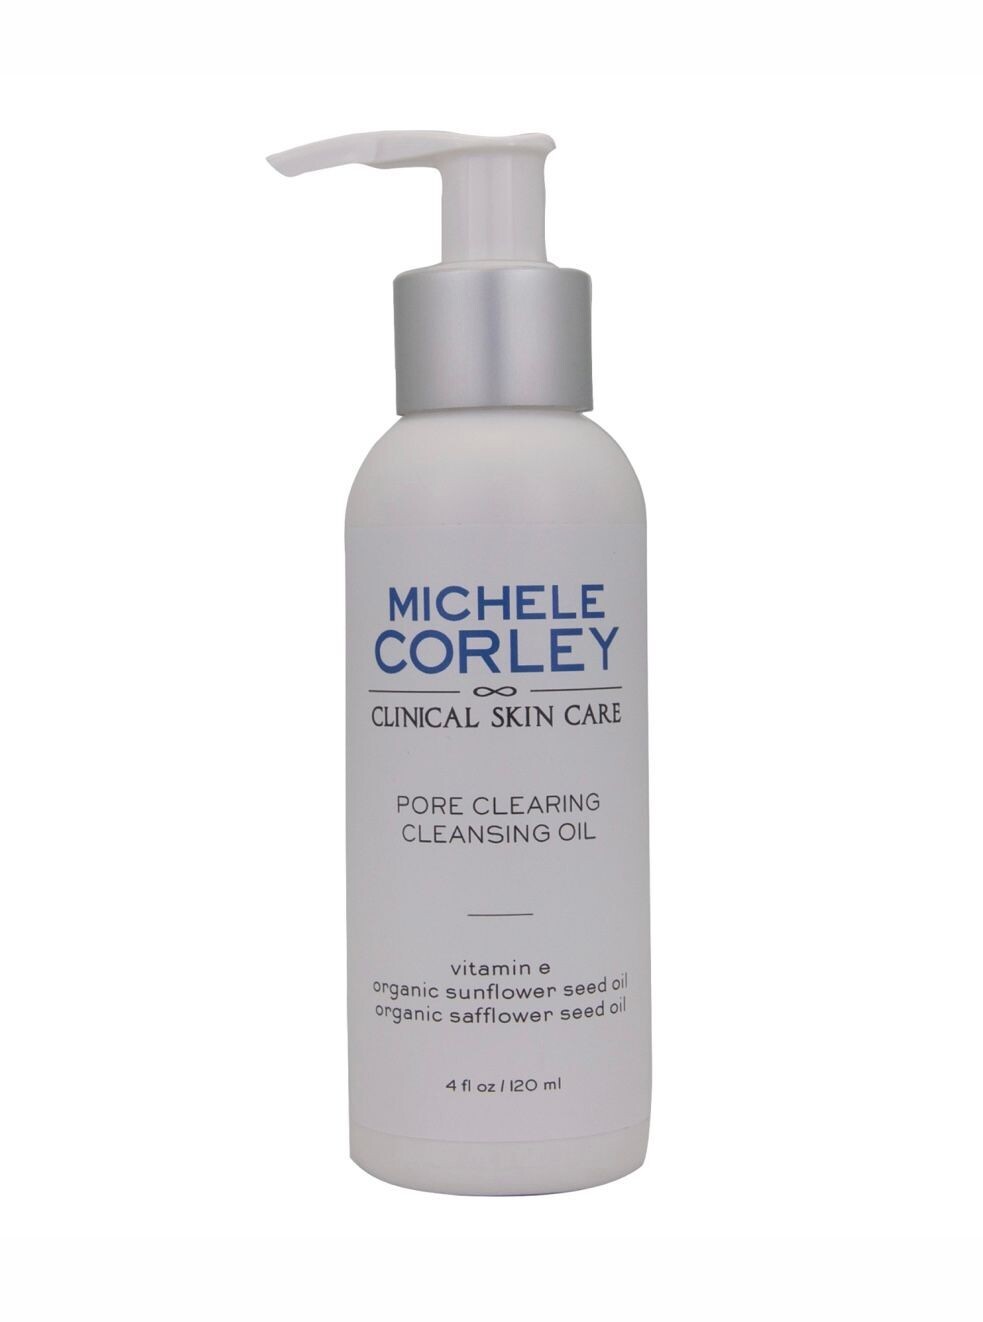 Michele Corley Pore Clearing Cleansing Oil 4oz